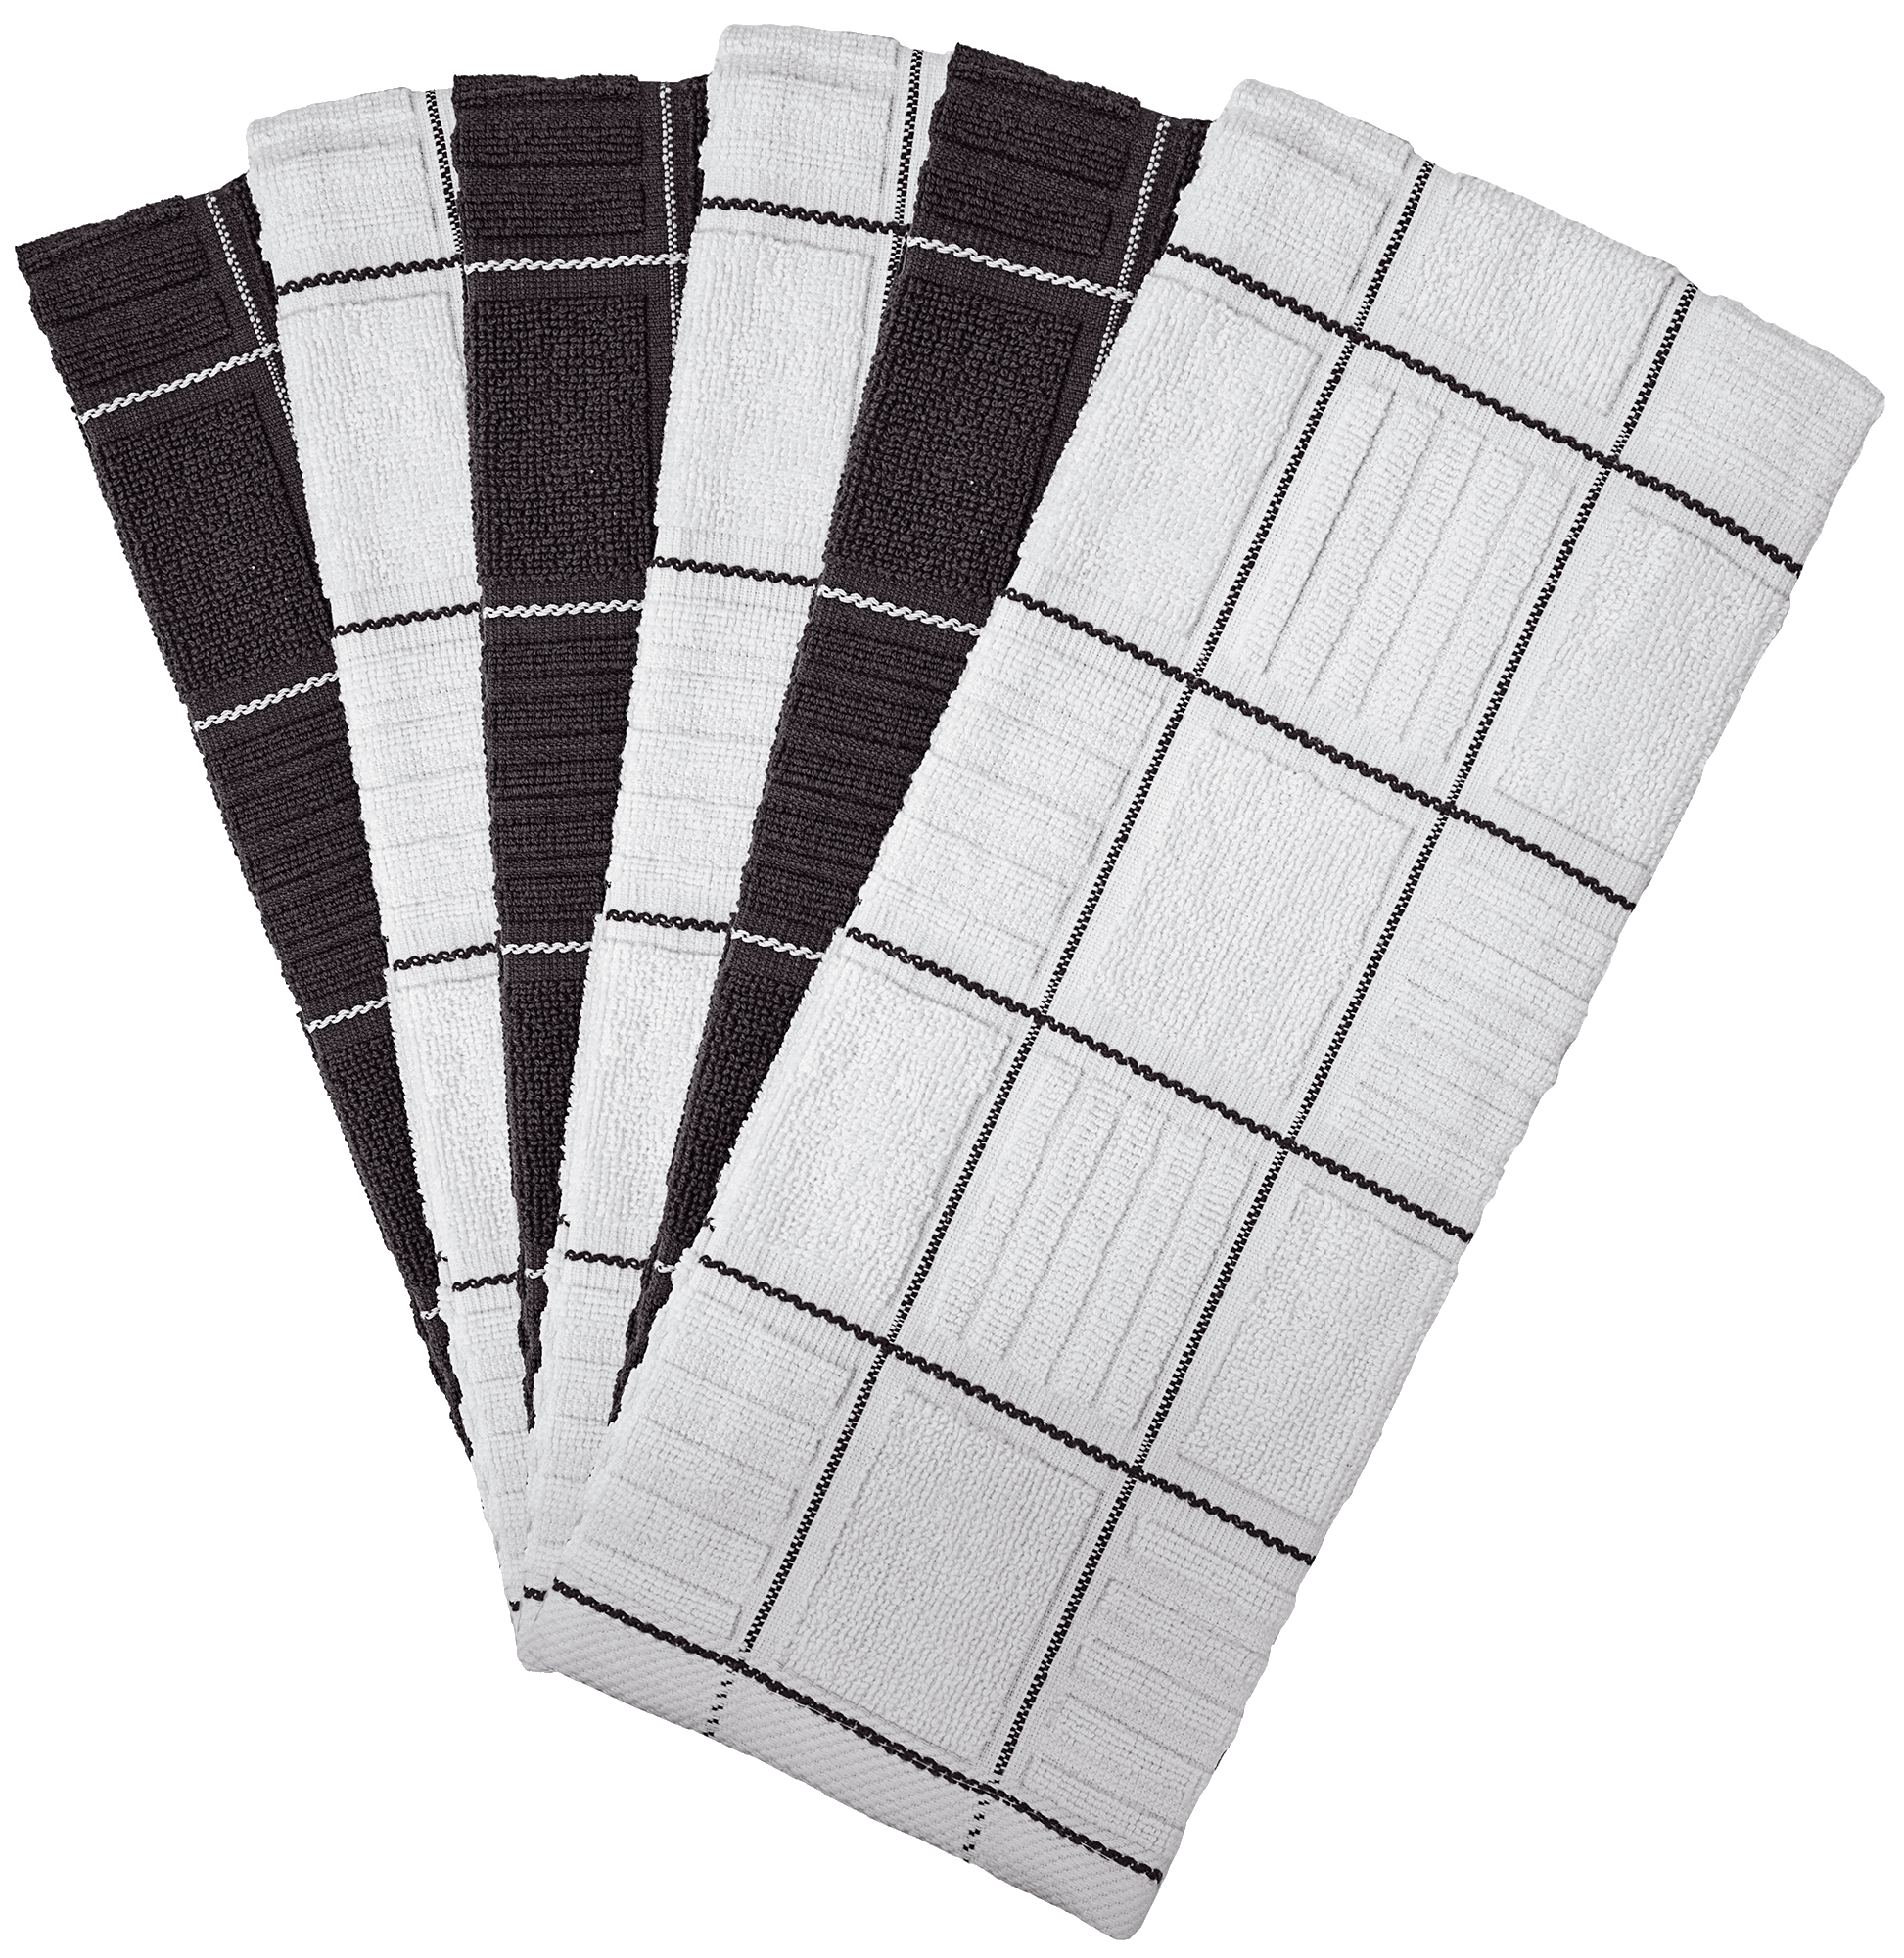 DecorRack 6 Large Kitchen Towels, 100% Cotton, 16 x 27 inches, White, Black  and Grey (6 Pack) 